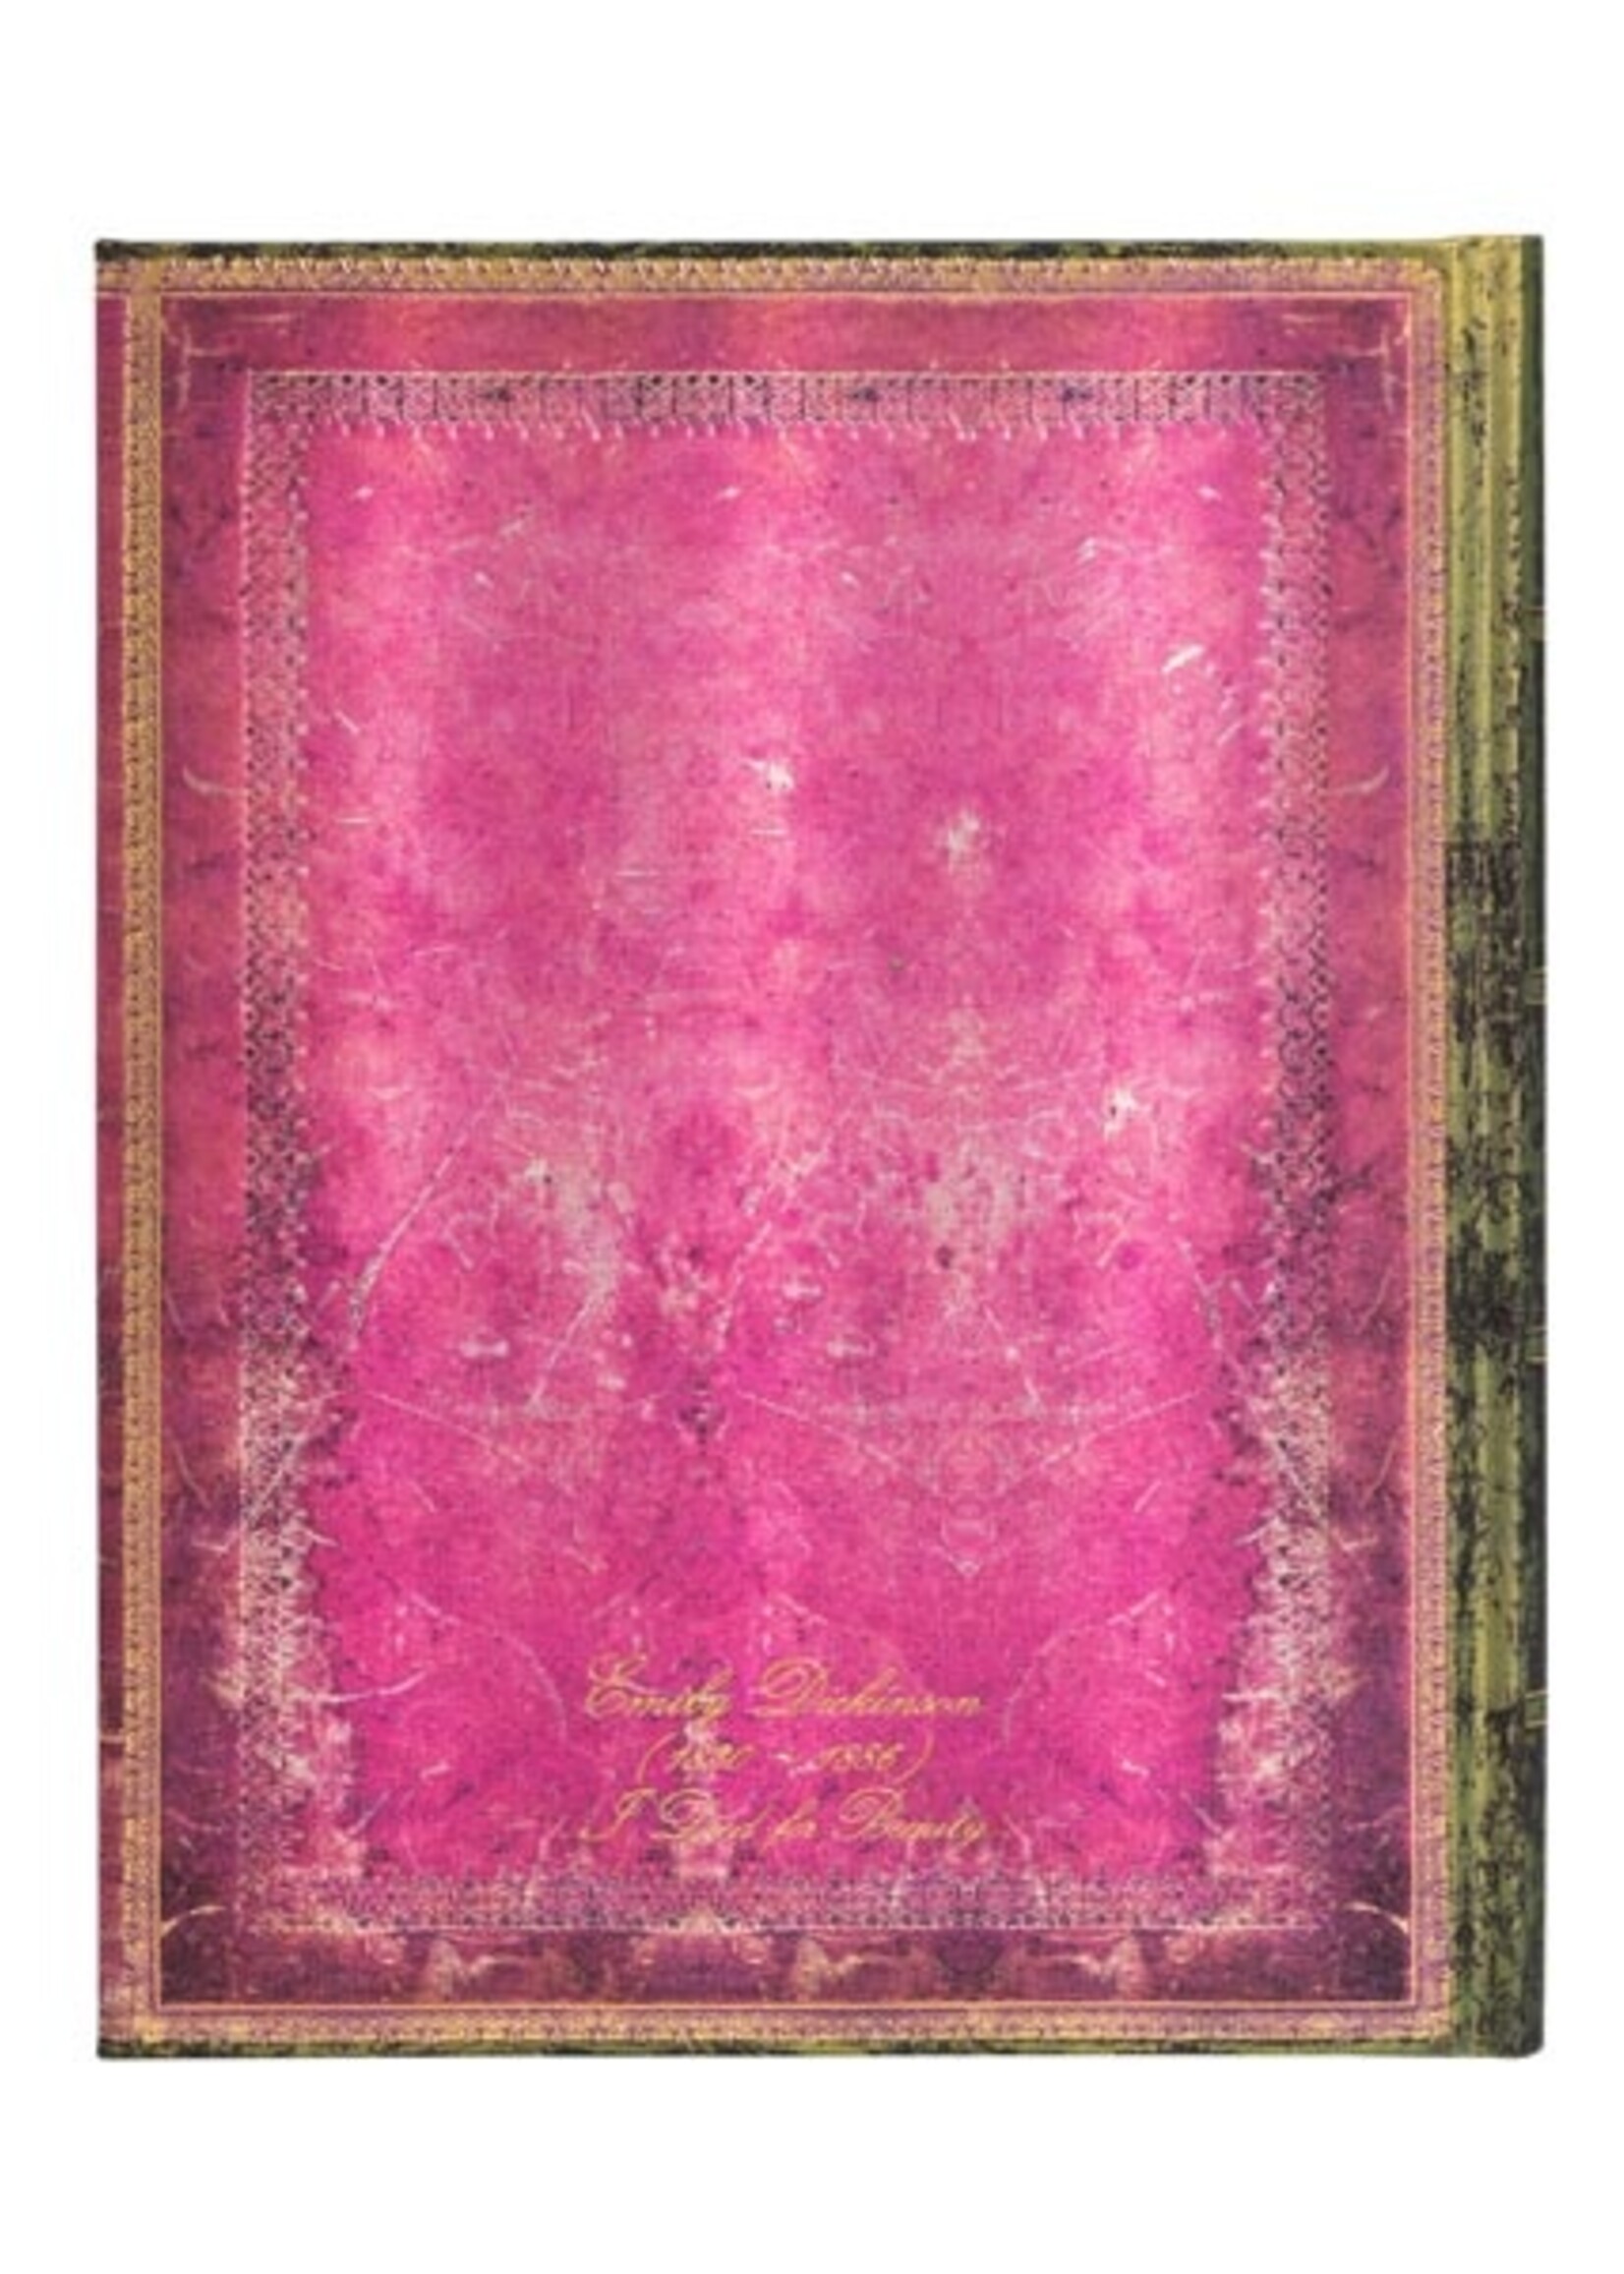 Paperblanks Notebook Ultra A5 Gelijnd Embellished Manuscripts Collection / Emily Dickinson, I Died for Beauty